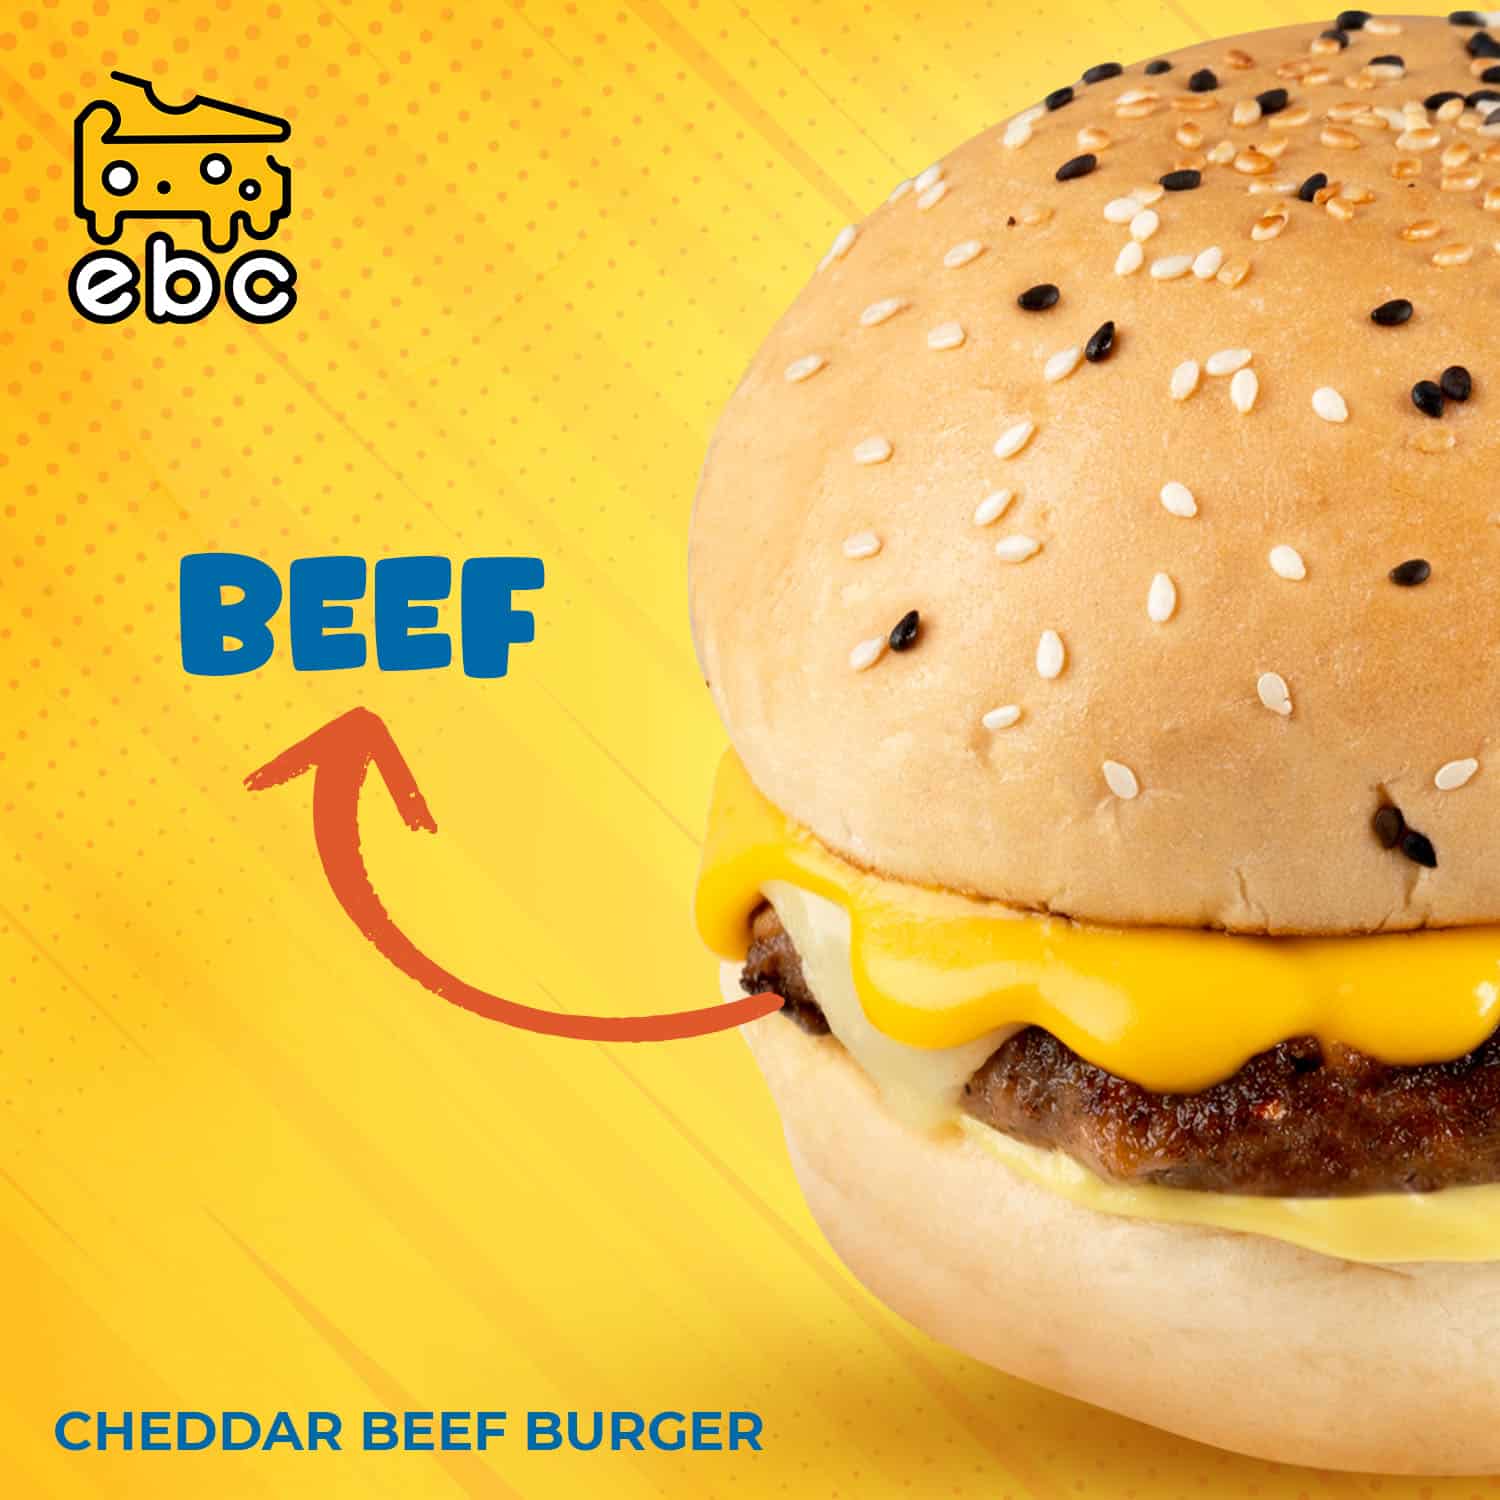 Cheddar-Beef Burger on Everything But Cheese Menu Philippines